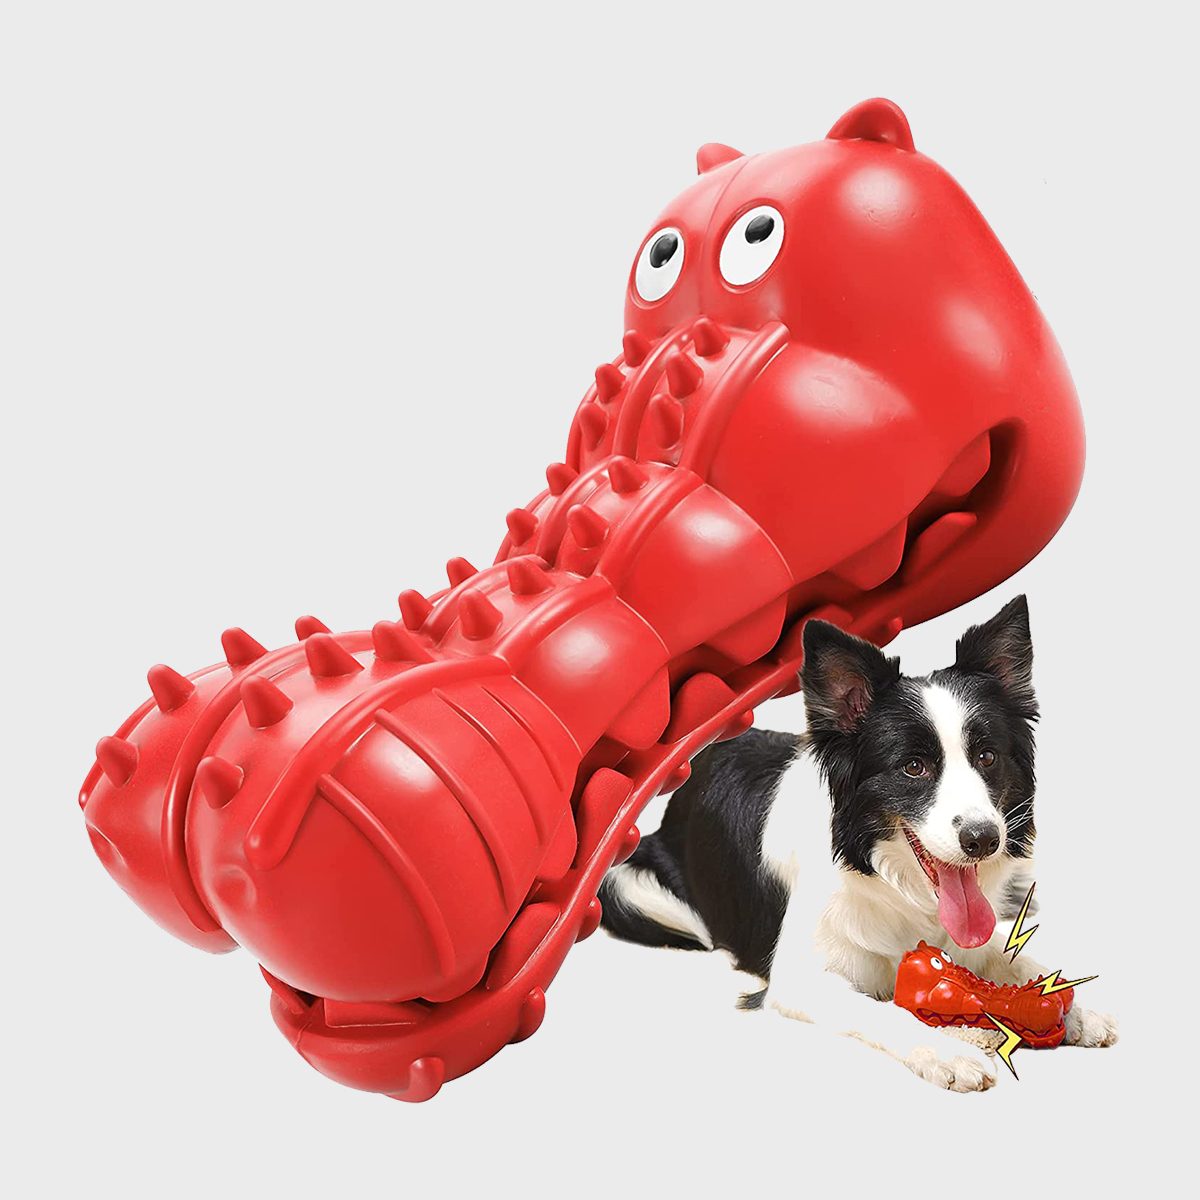 These Are The 15 Toughest Dog Toys Available For Under $18